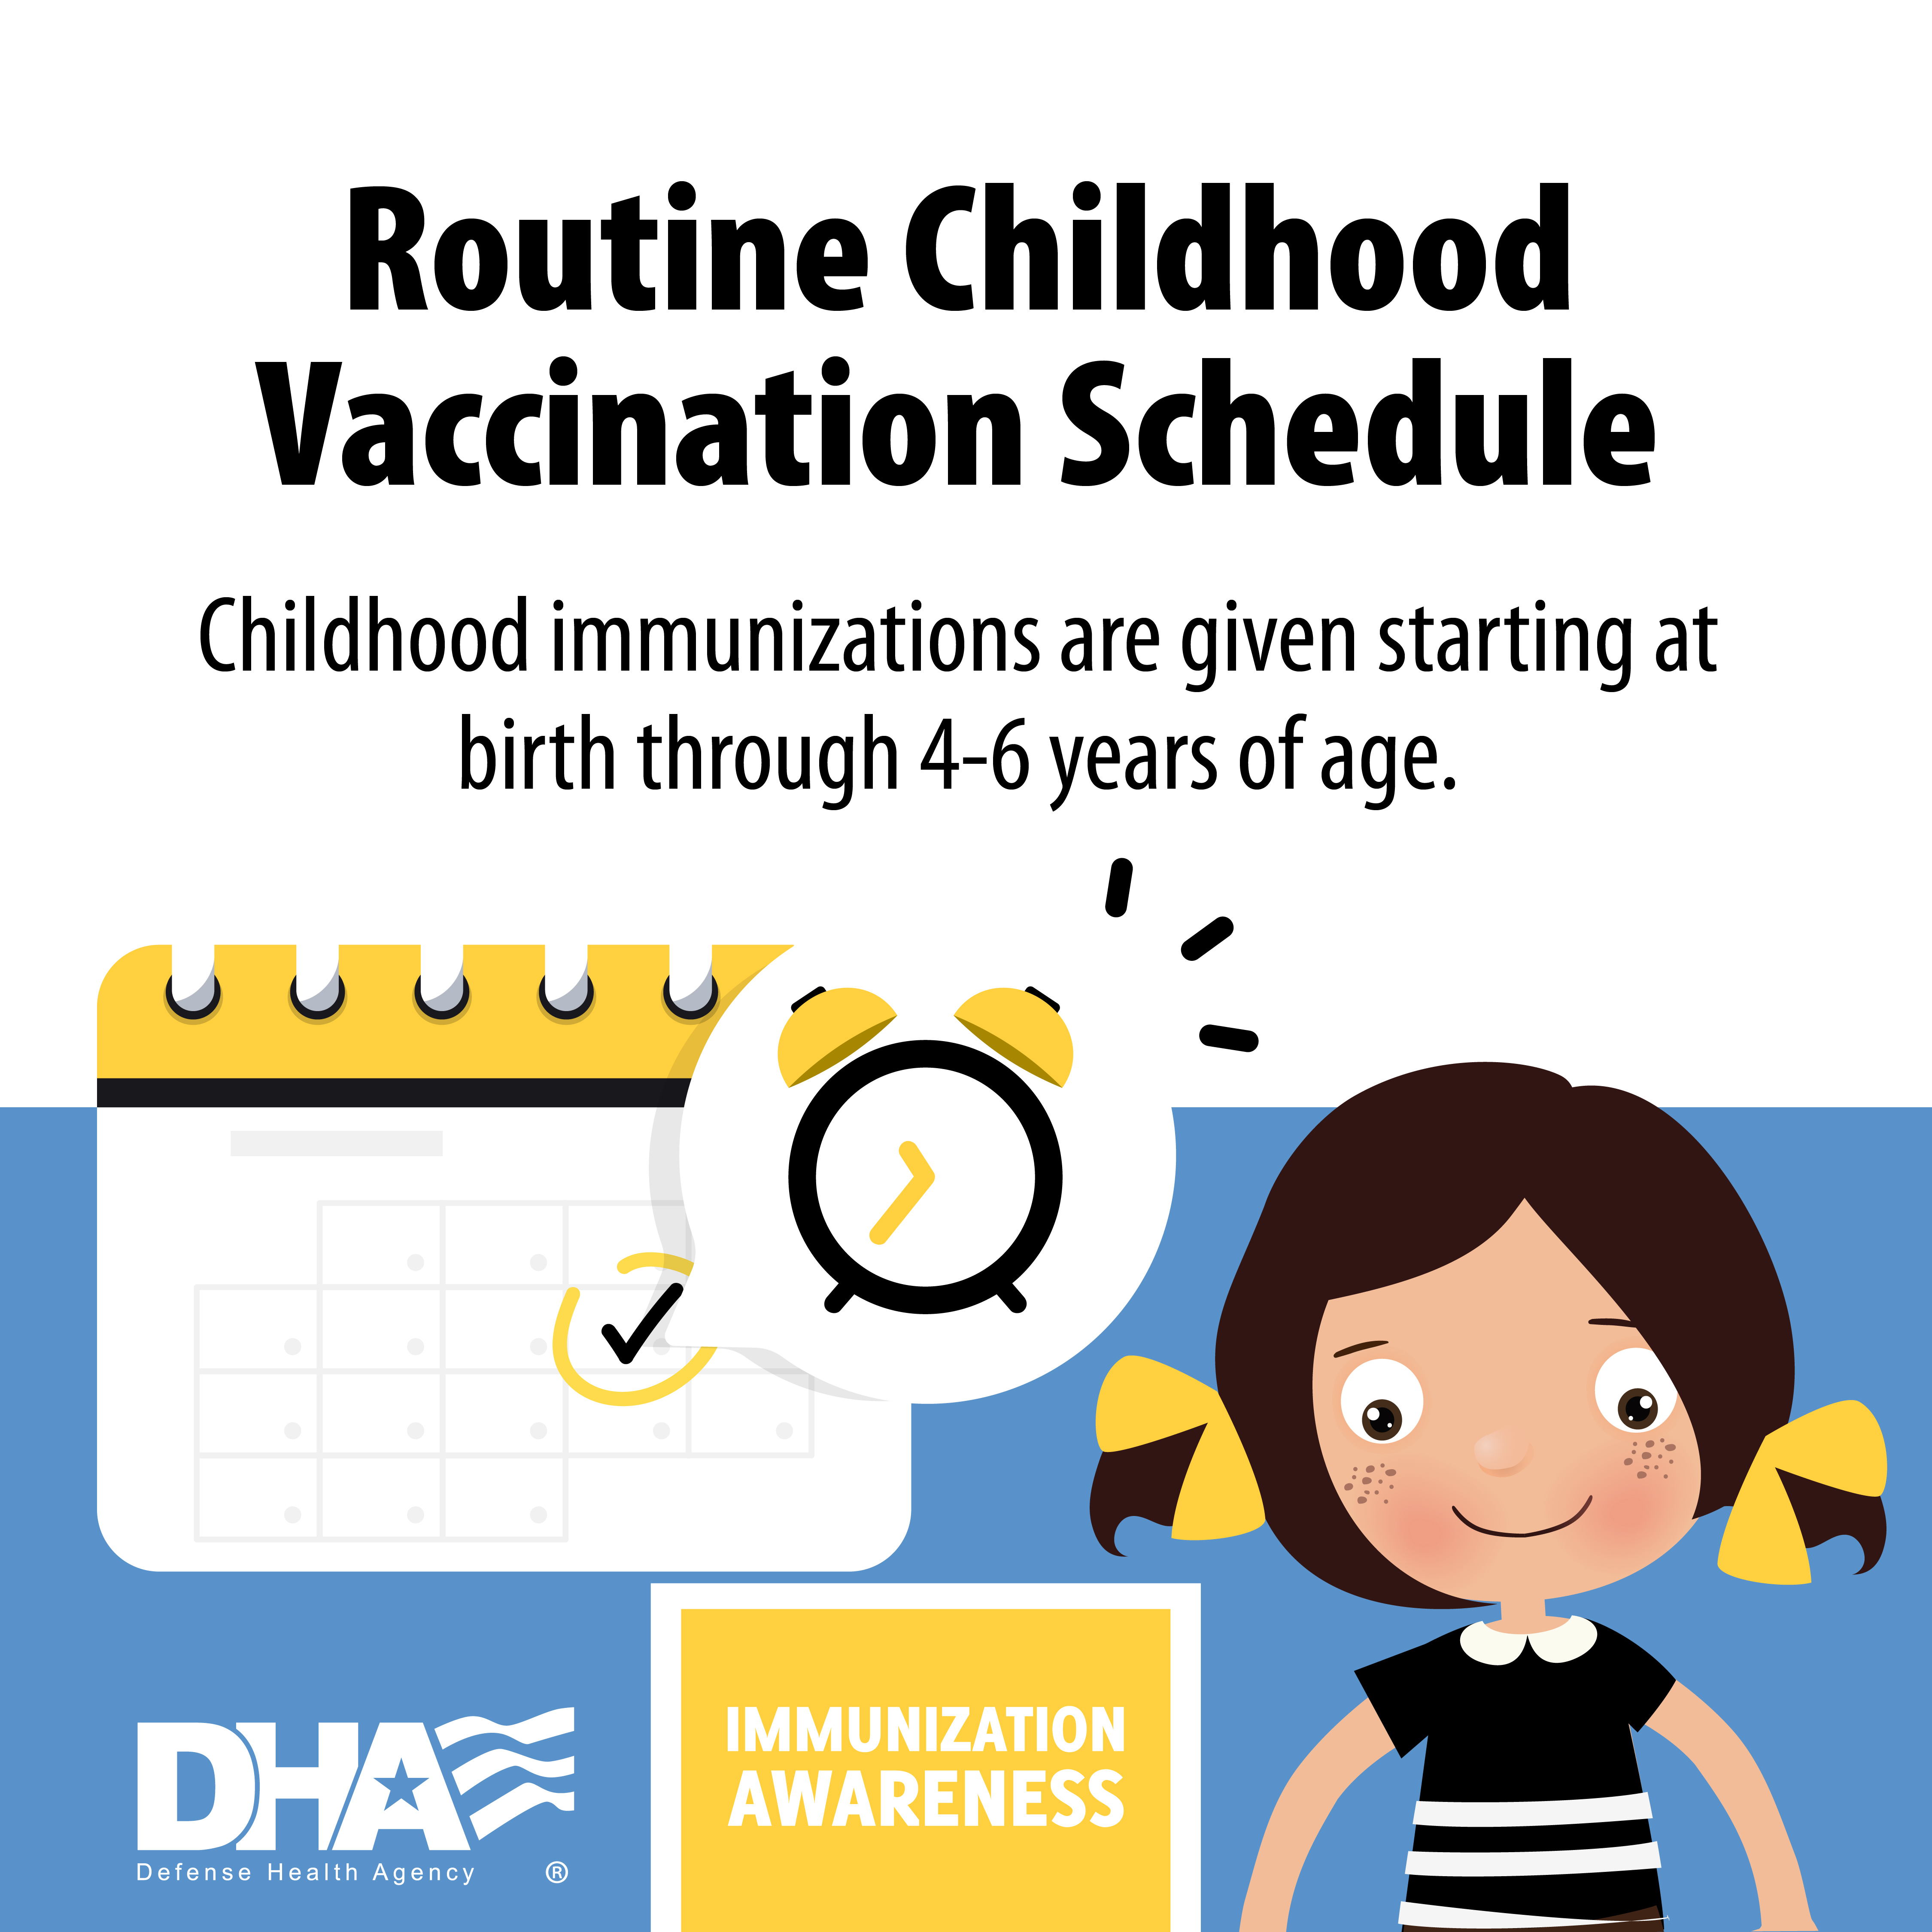 Link to biography of Immunization Awareness: Vaccination Schedule